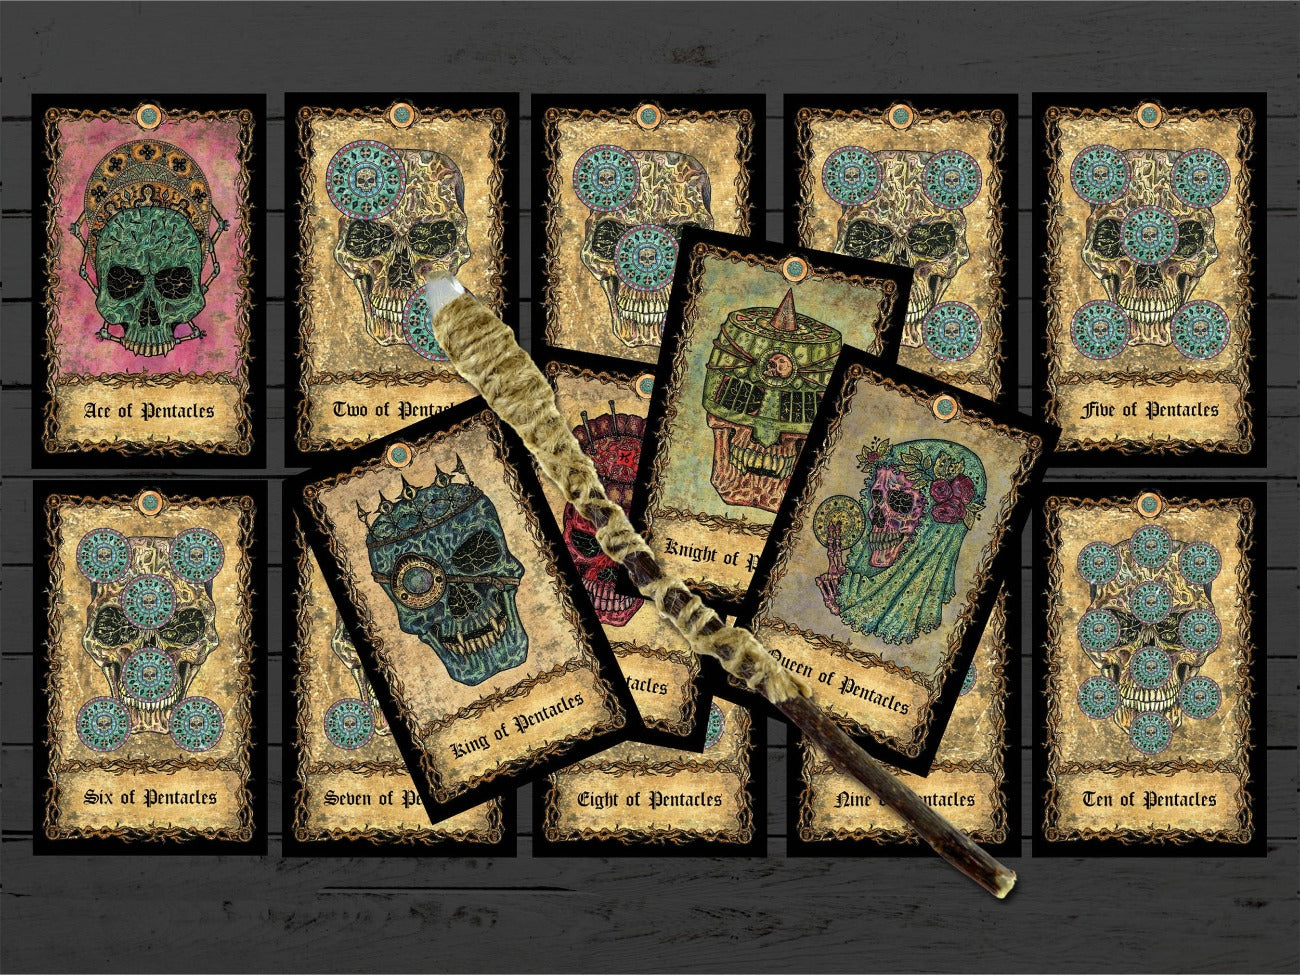 The 14 cards of the suit of Pentacles from Ace to King.